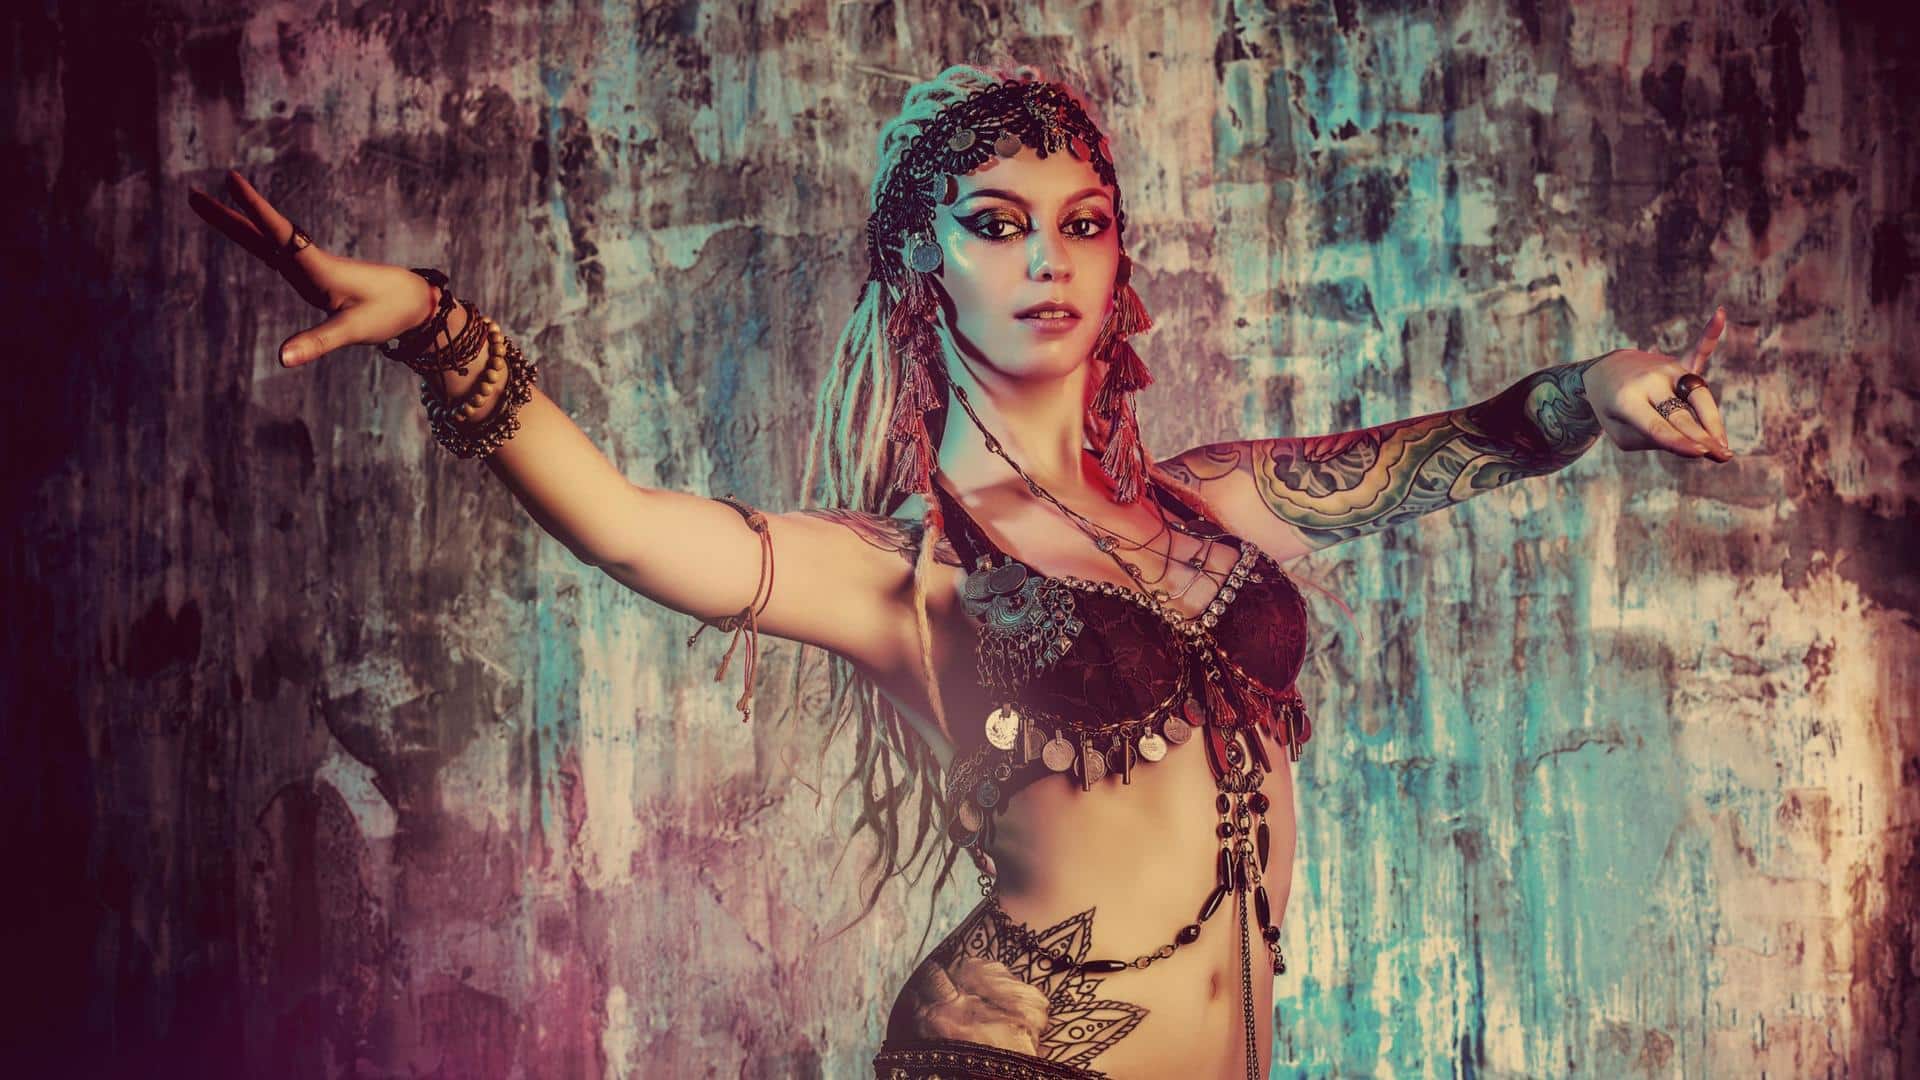 World belly dance day: Celebrating this timeless art form